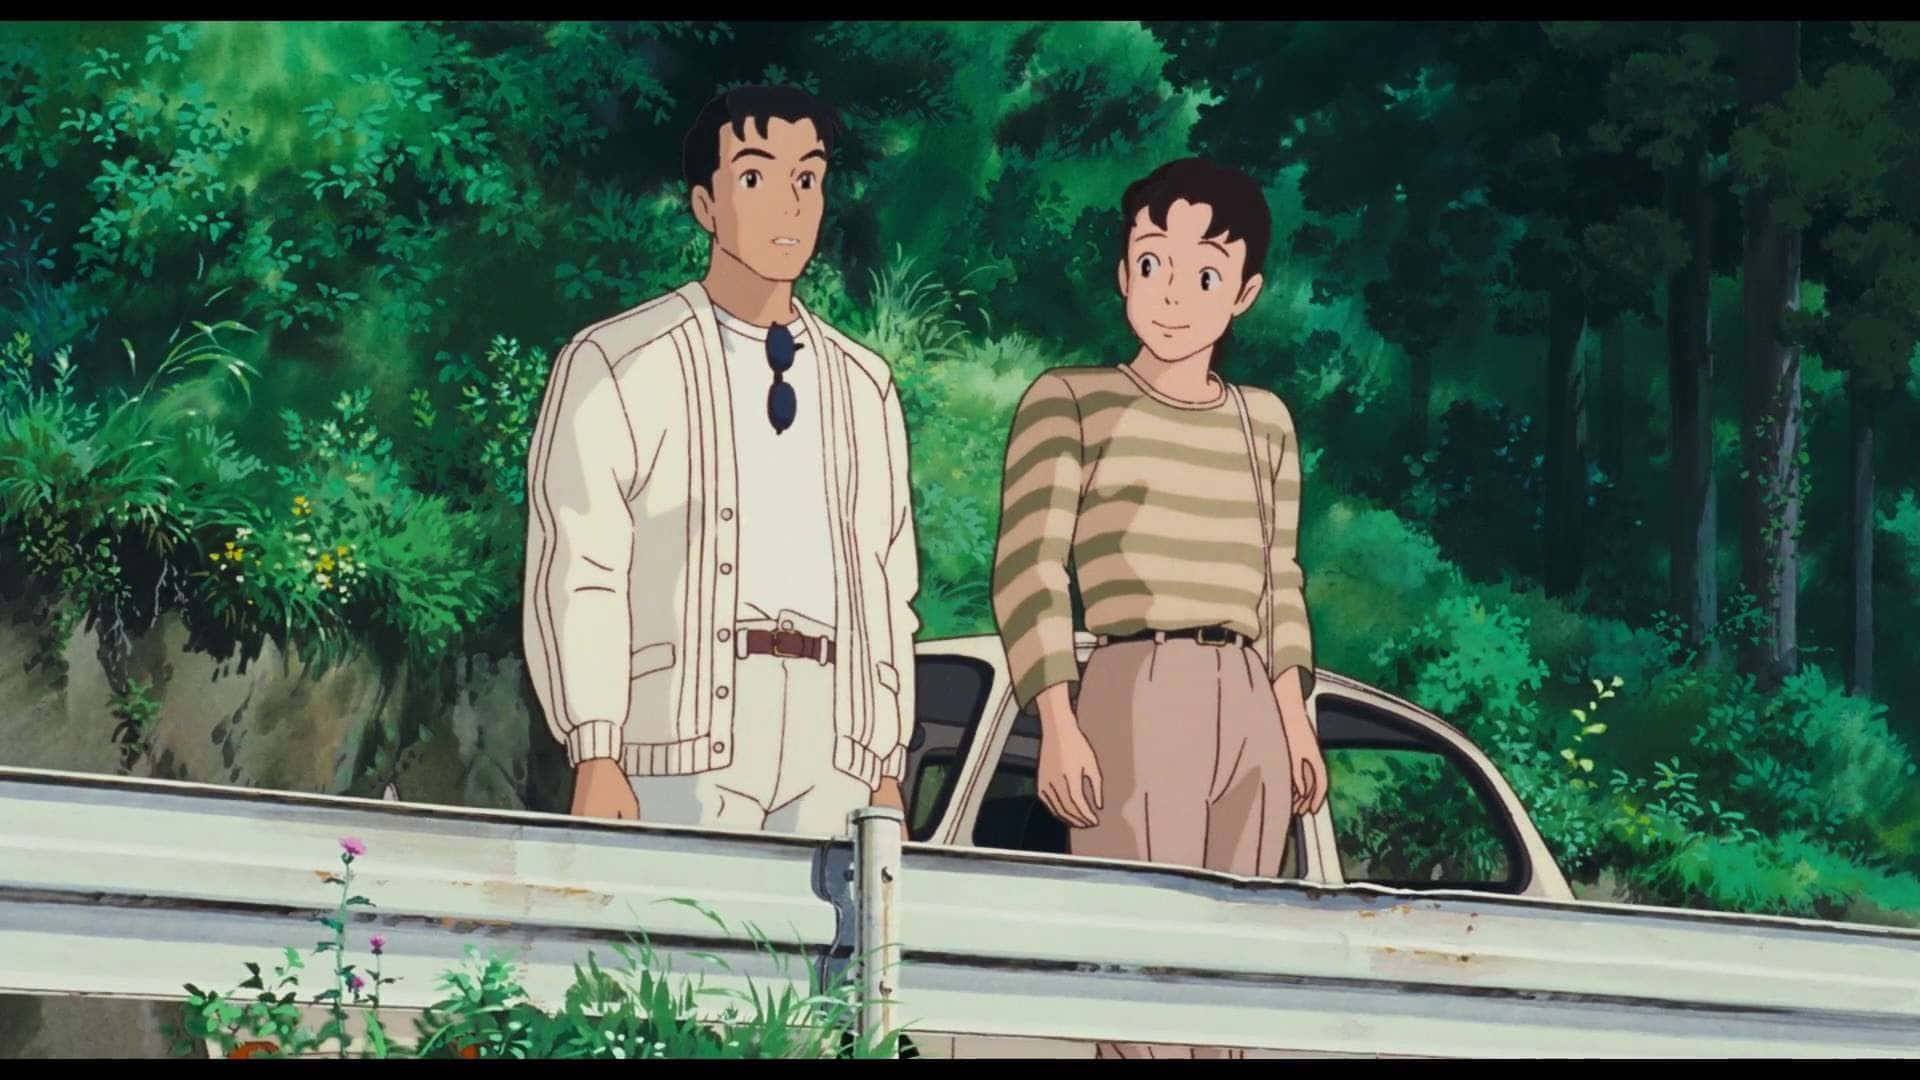 A heartfelt throwback - Taeko and Toshio admire the countryside in Only Yesterday Wallpaper